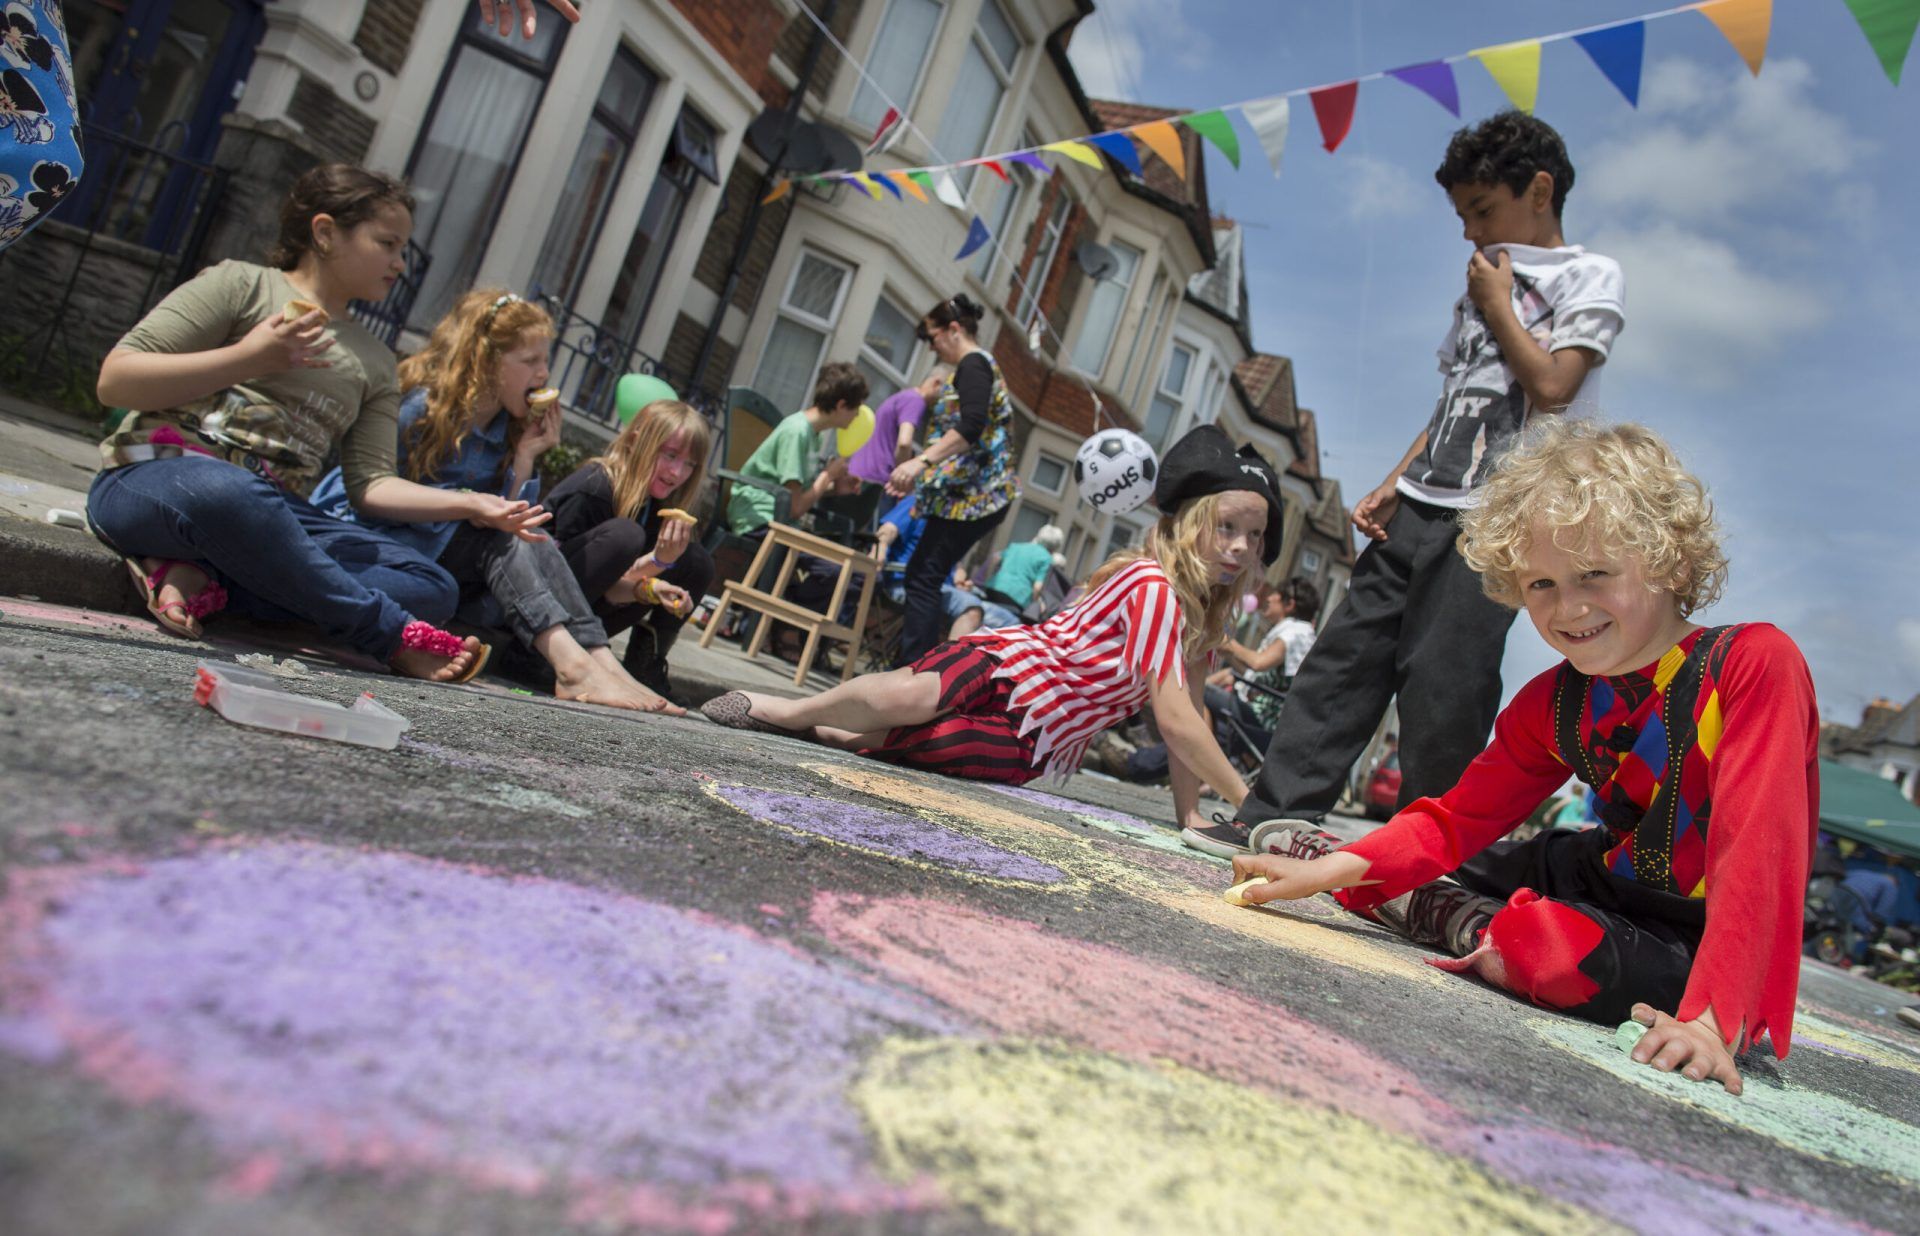 Children drawing on the street with chalk